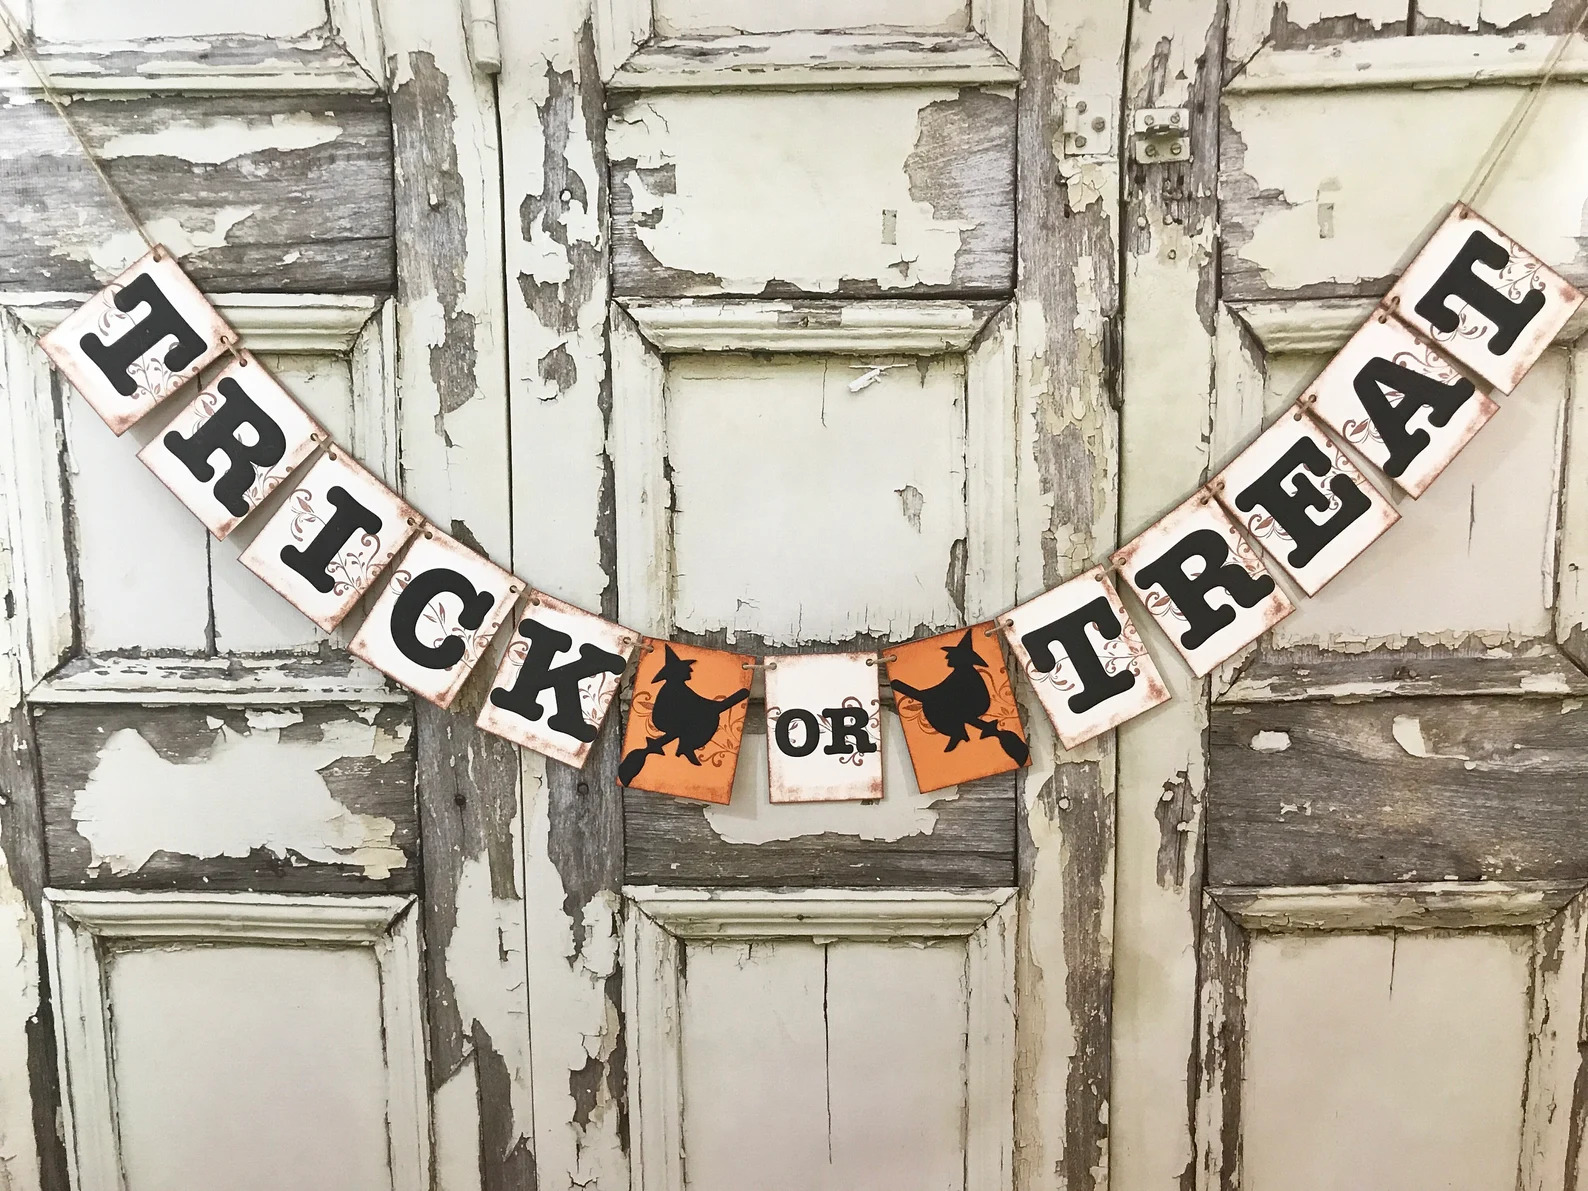 15 Awesome Halloween Banner Designs For A Spooky Touch To Your Décor